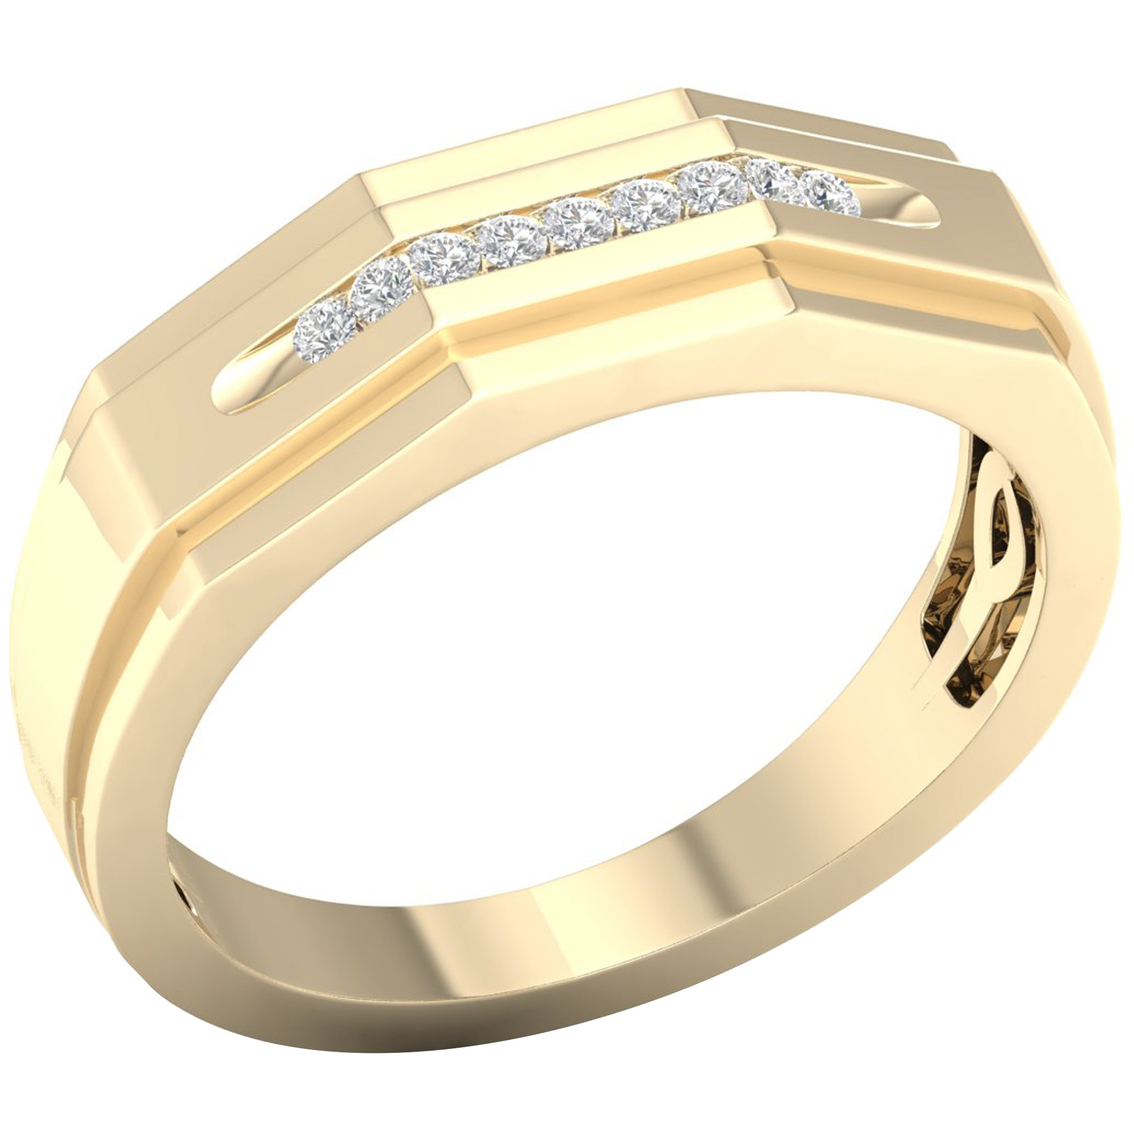 10K Yellow Gold Diamond Accent Ring - Image 2 of 3